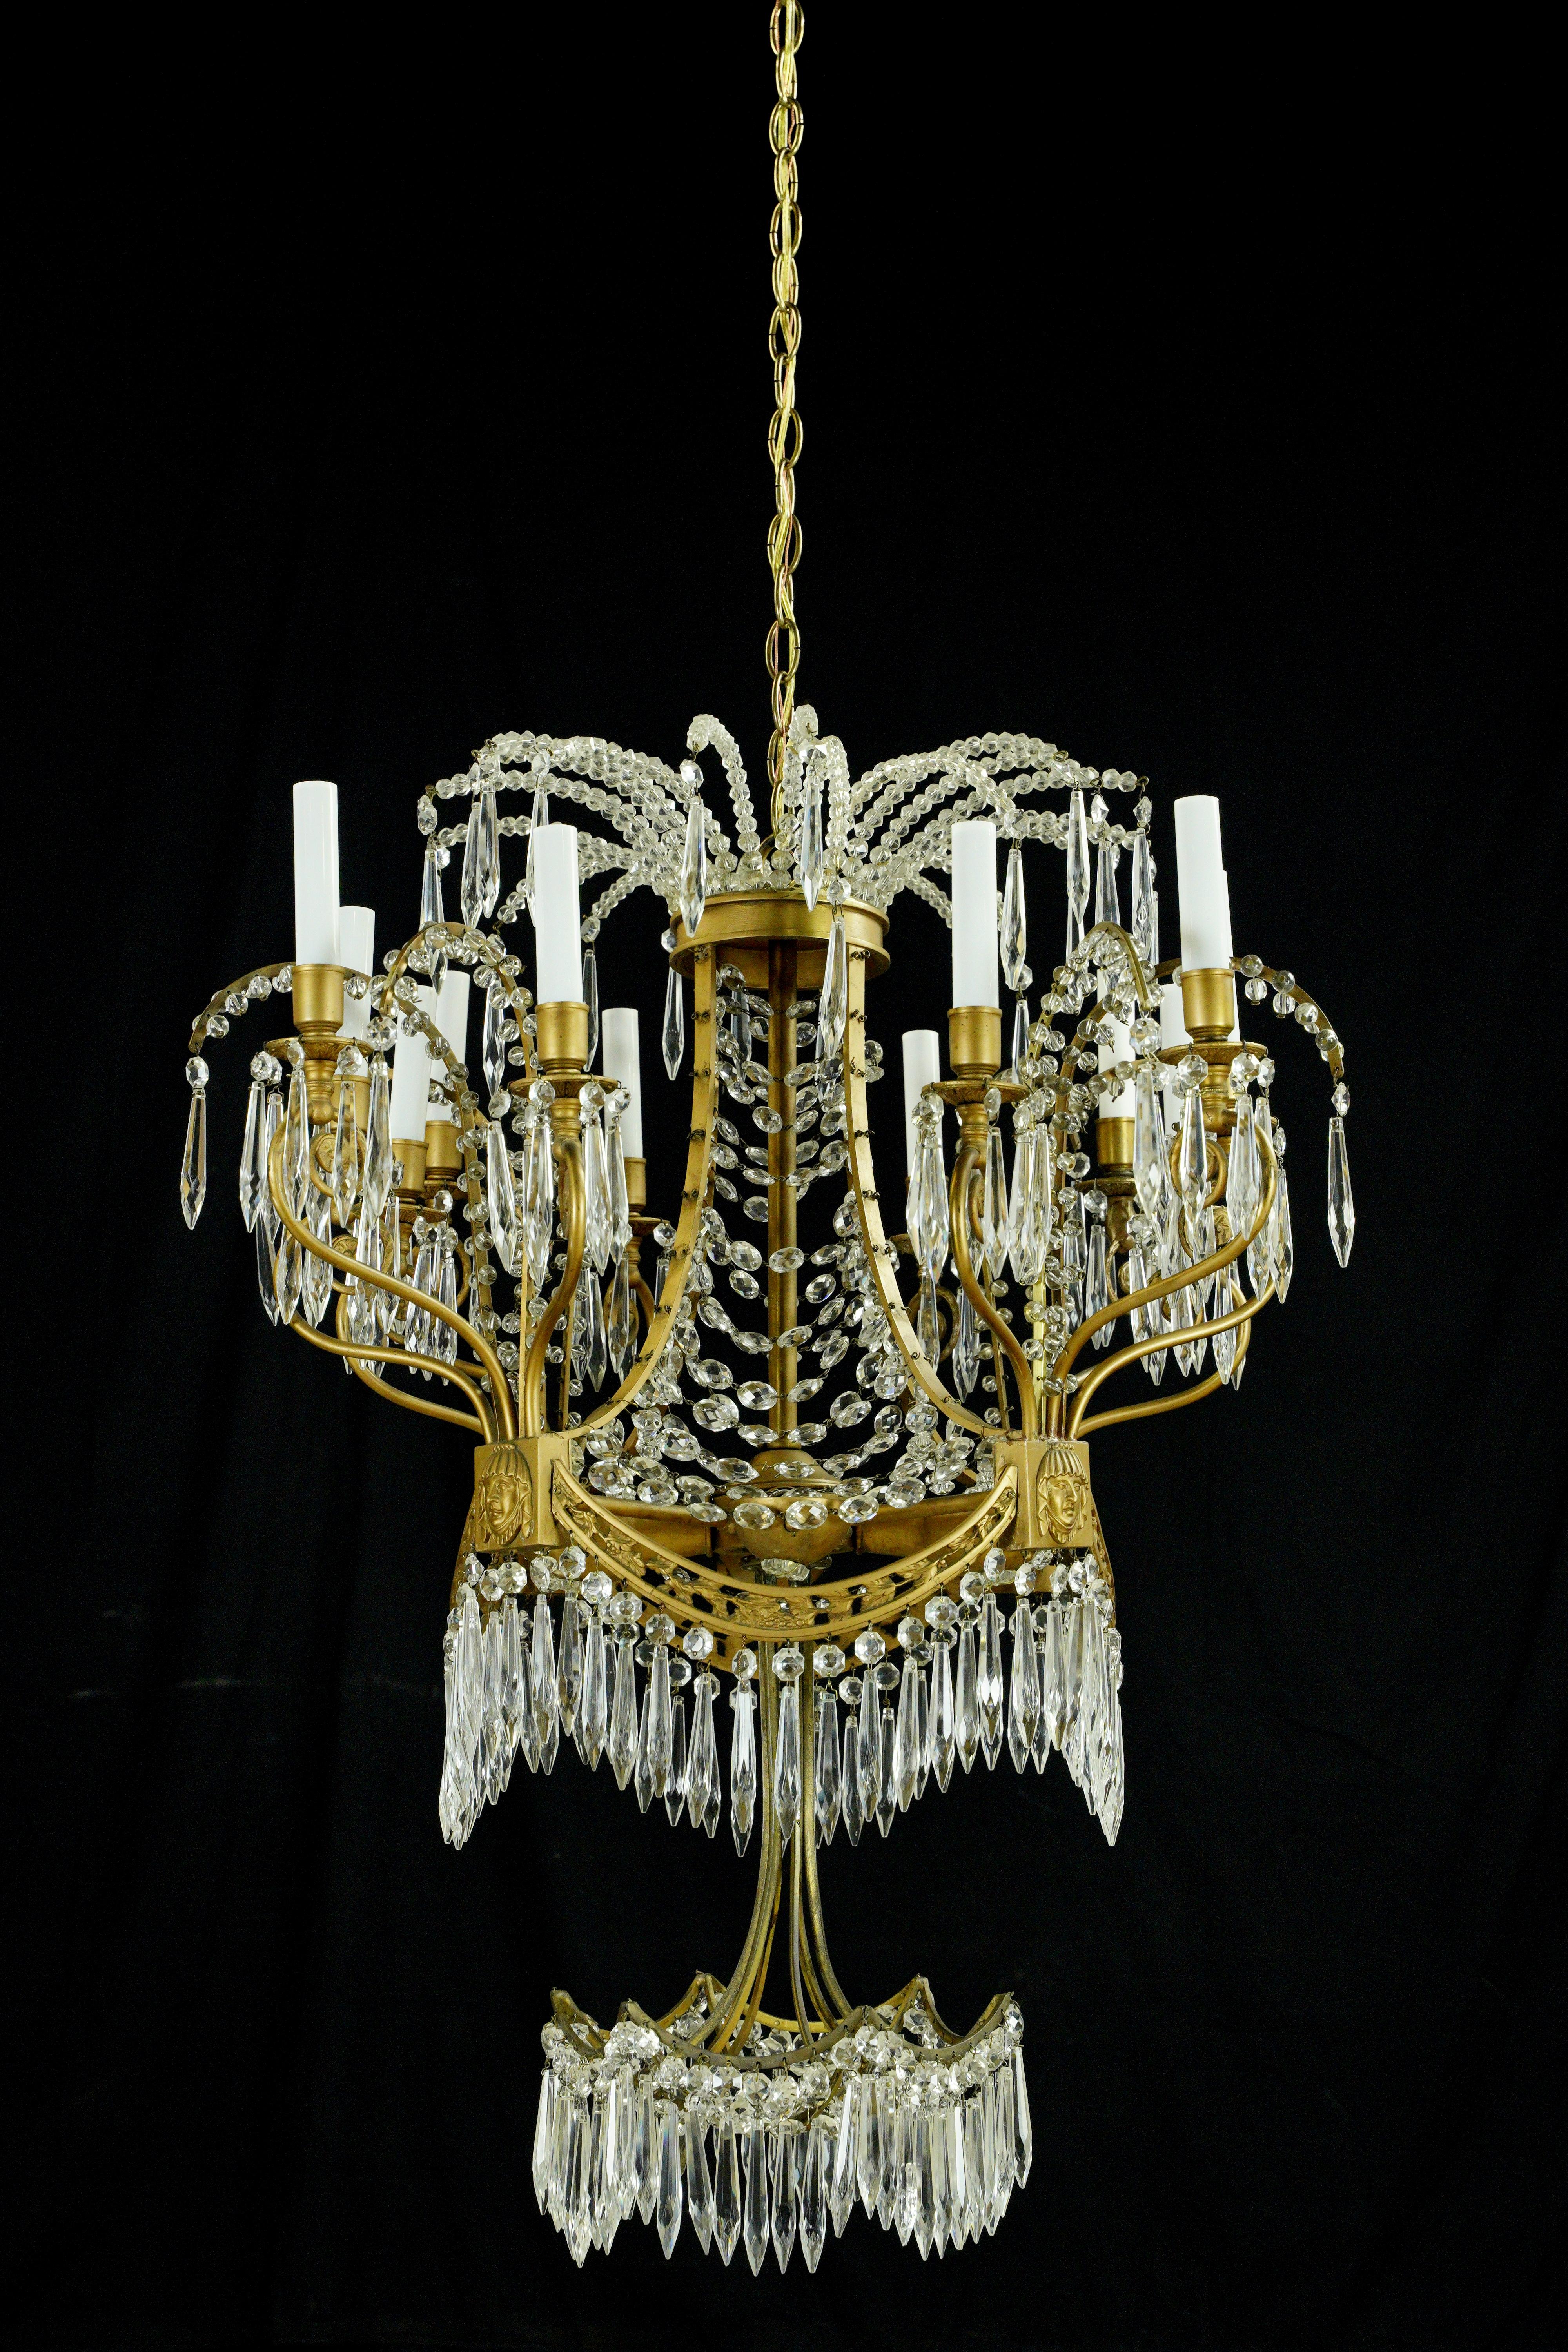 Plaza Hotel Russia 12 Arm Crystal Dore Bronze Chandelier For Sale 11